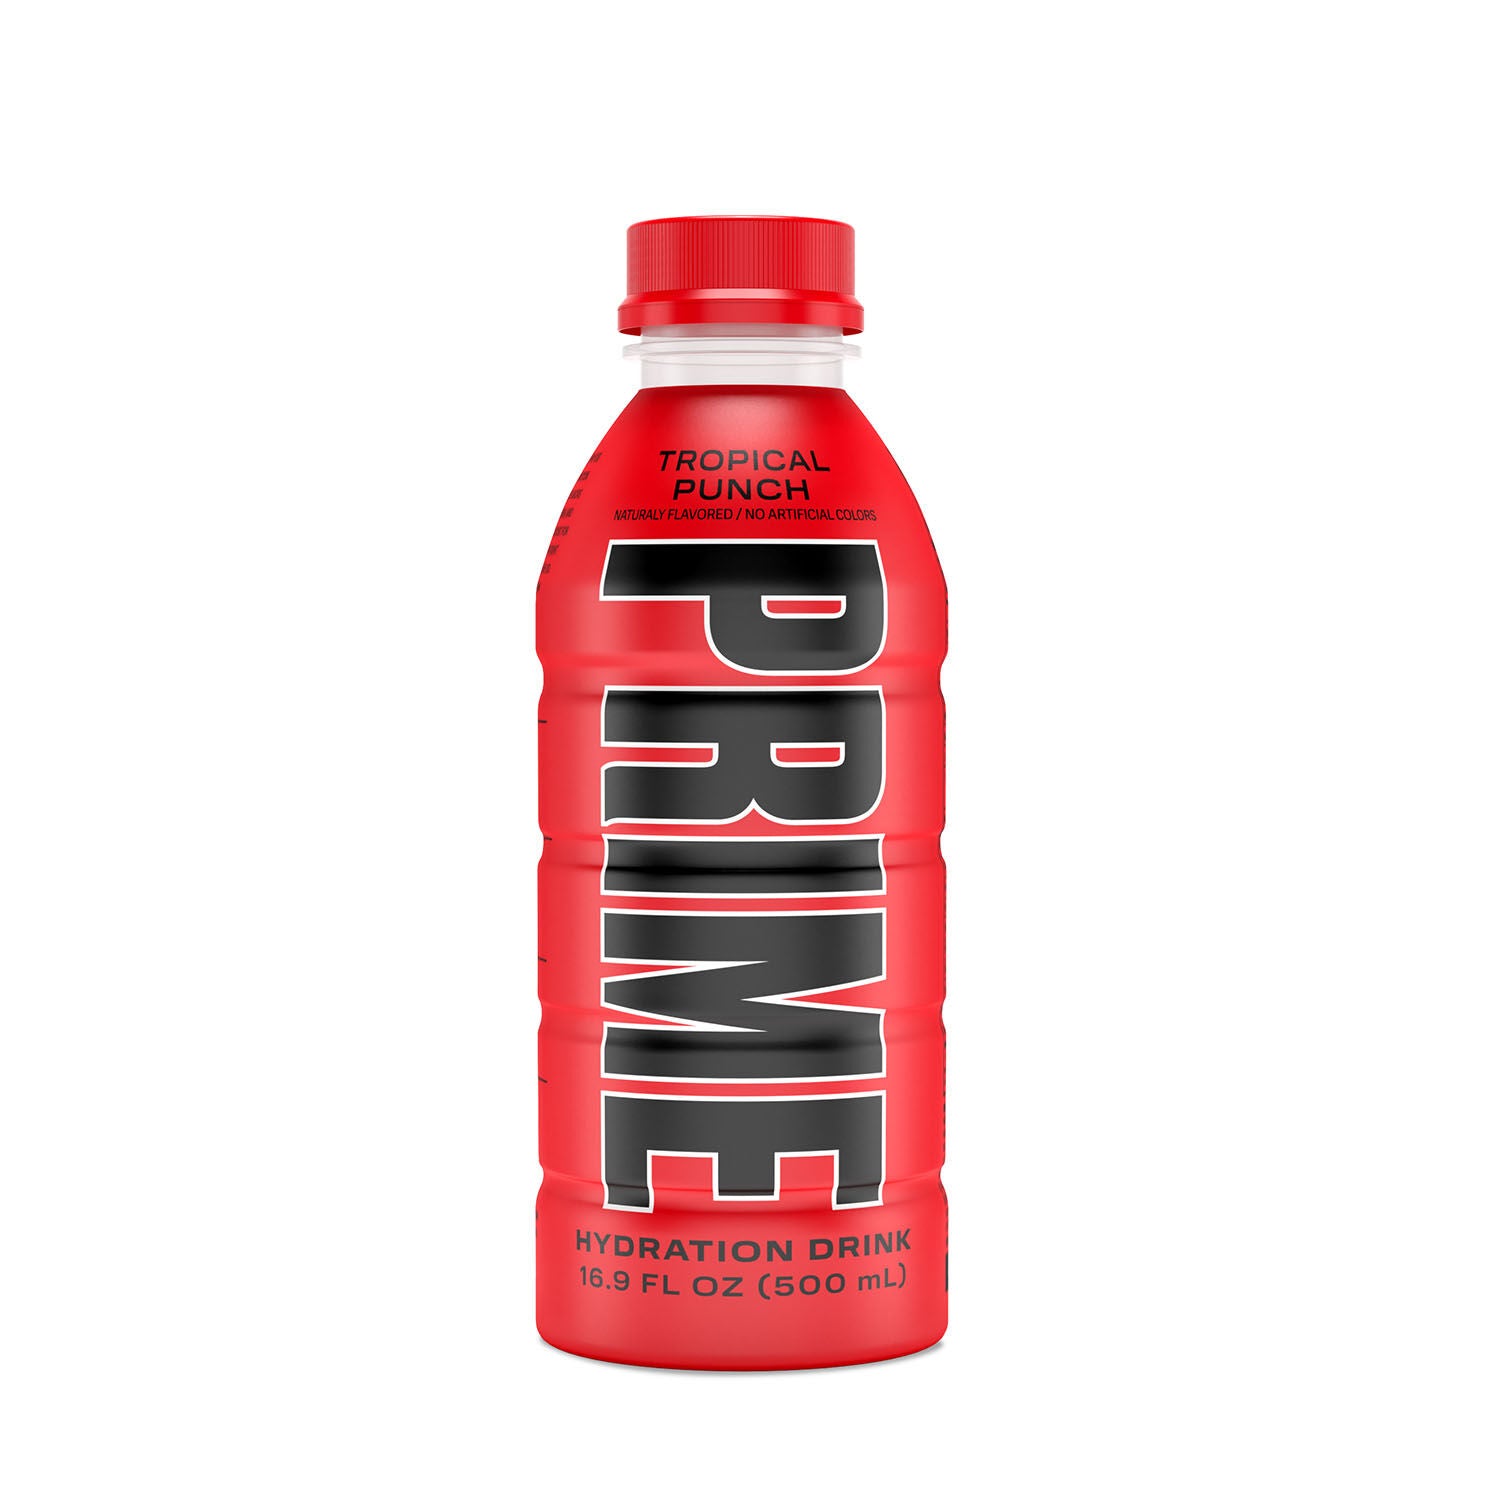 500ml bottle of Tropical Punch Prime